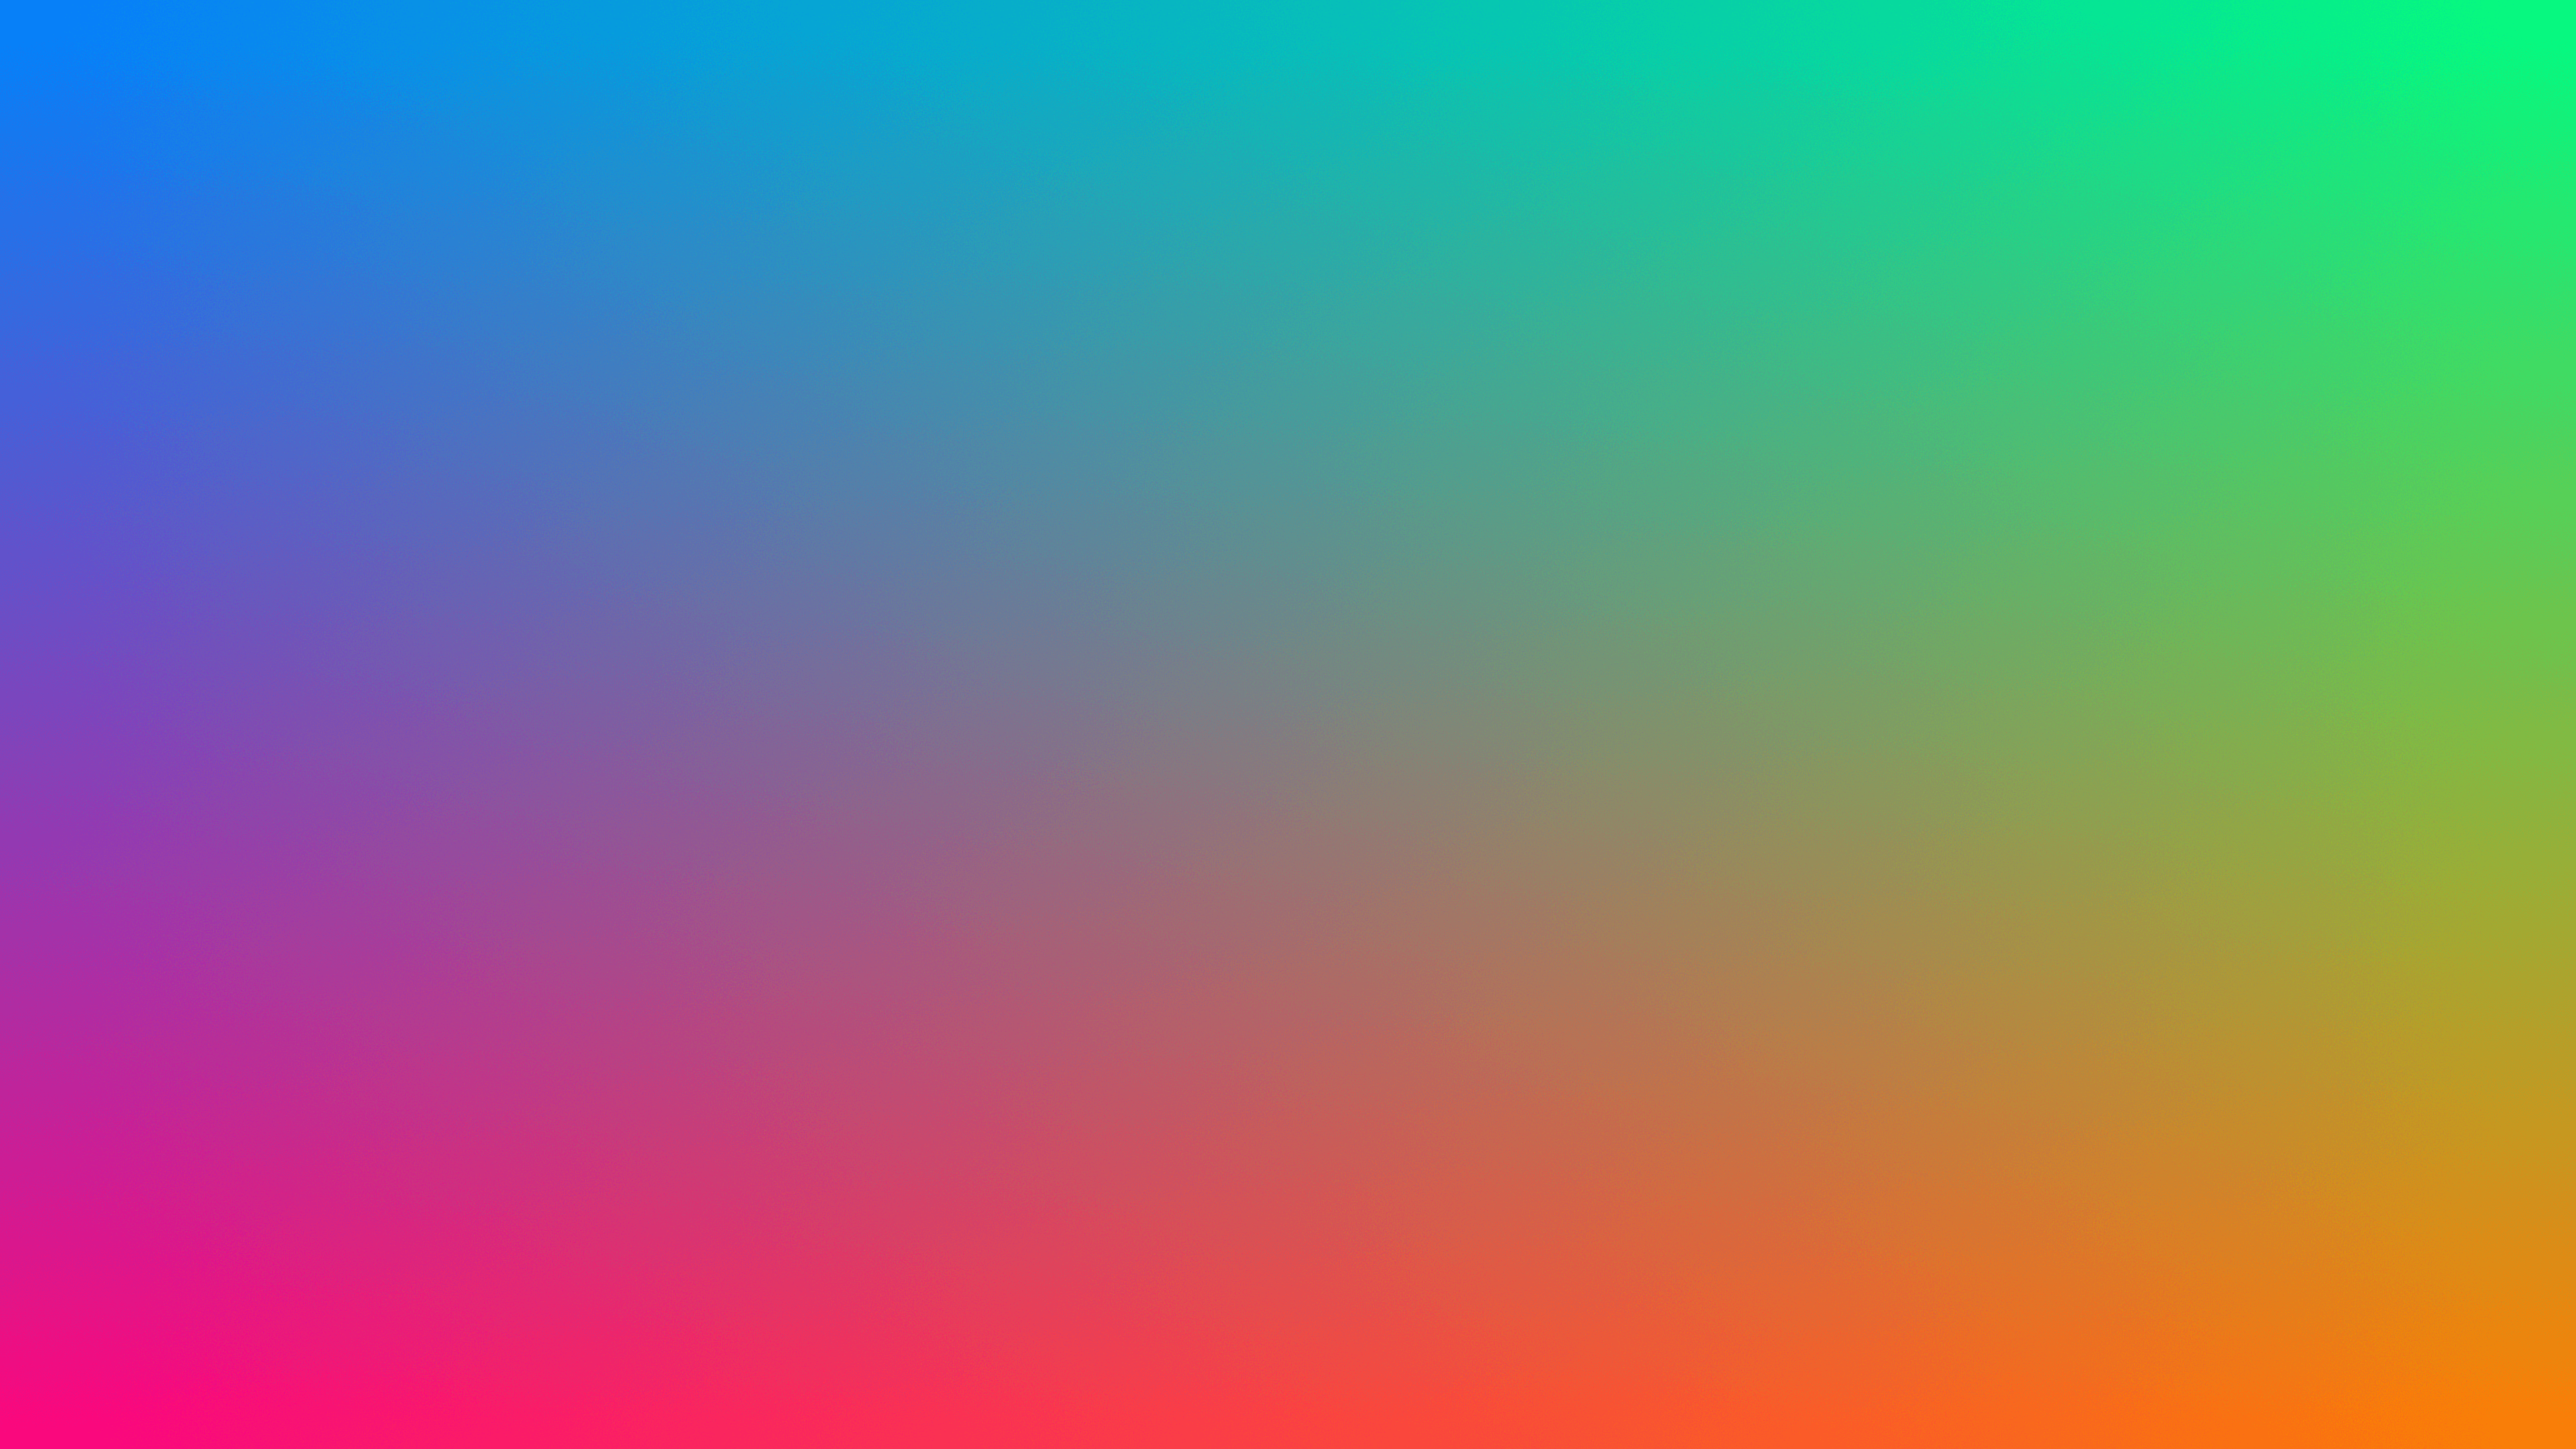 Just a simple, clean quadruple color gradient. Dithered to avoid